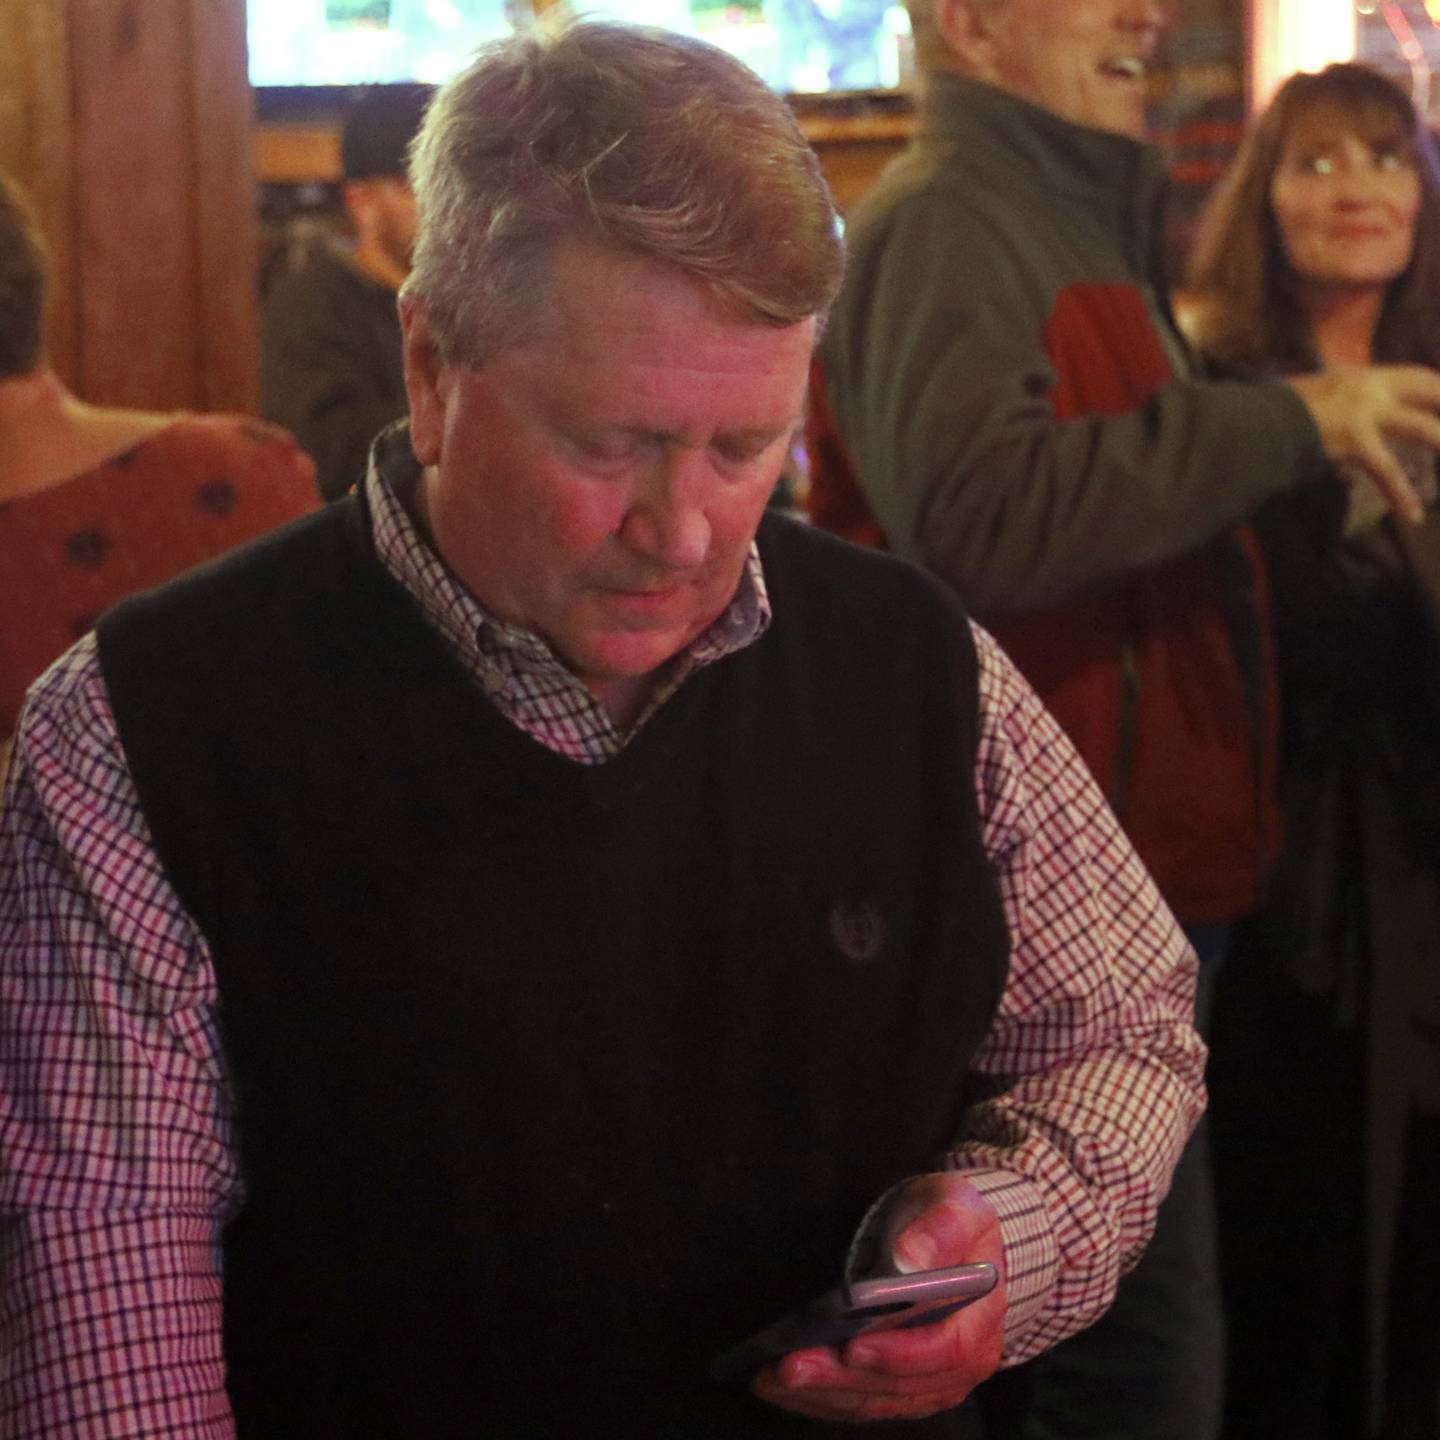 Crystal Lake's City Council candidate Brett Hopkins checks election results during an election watch party for Crystal Lake Mayor Haig Haleblian and candidates for Crystal Lake's City Council at the Cottage Tuesday, April 4, 2023, in Crystal Lake.